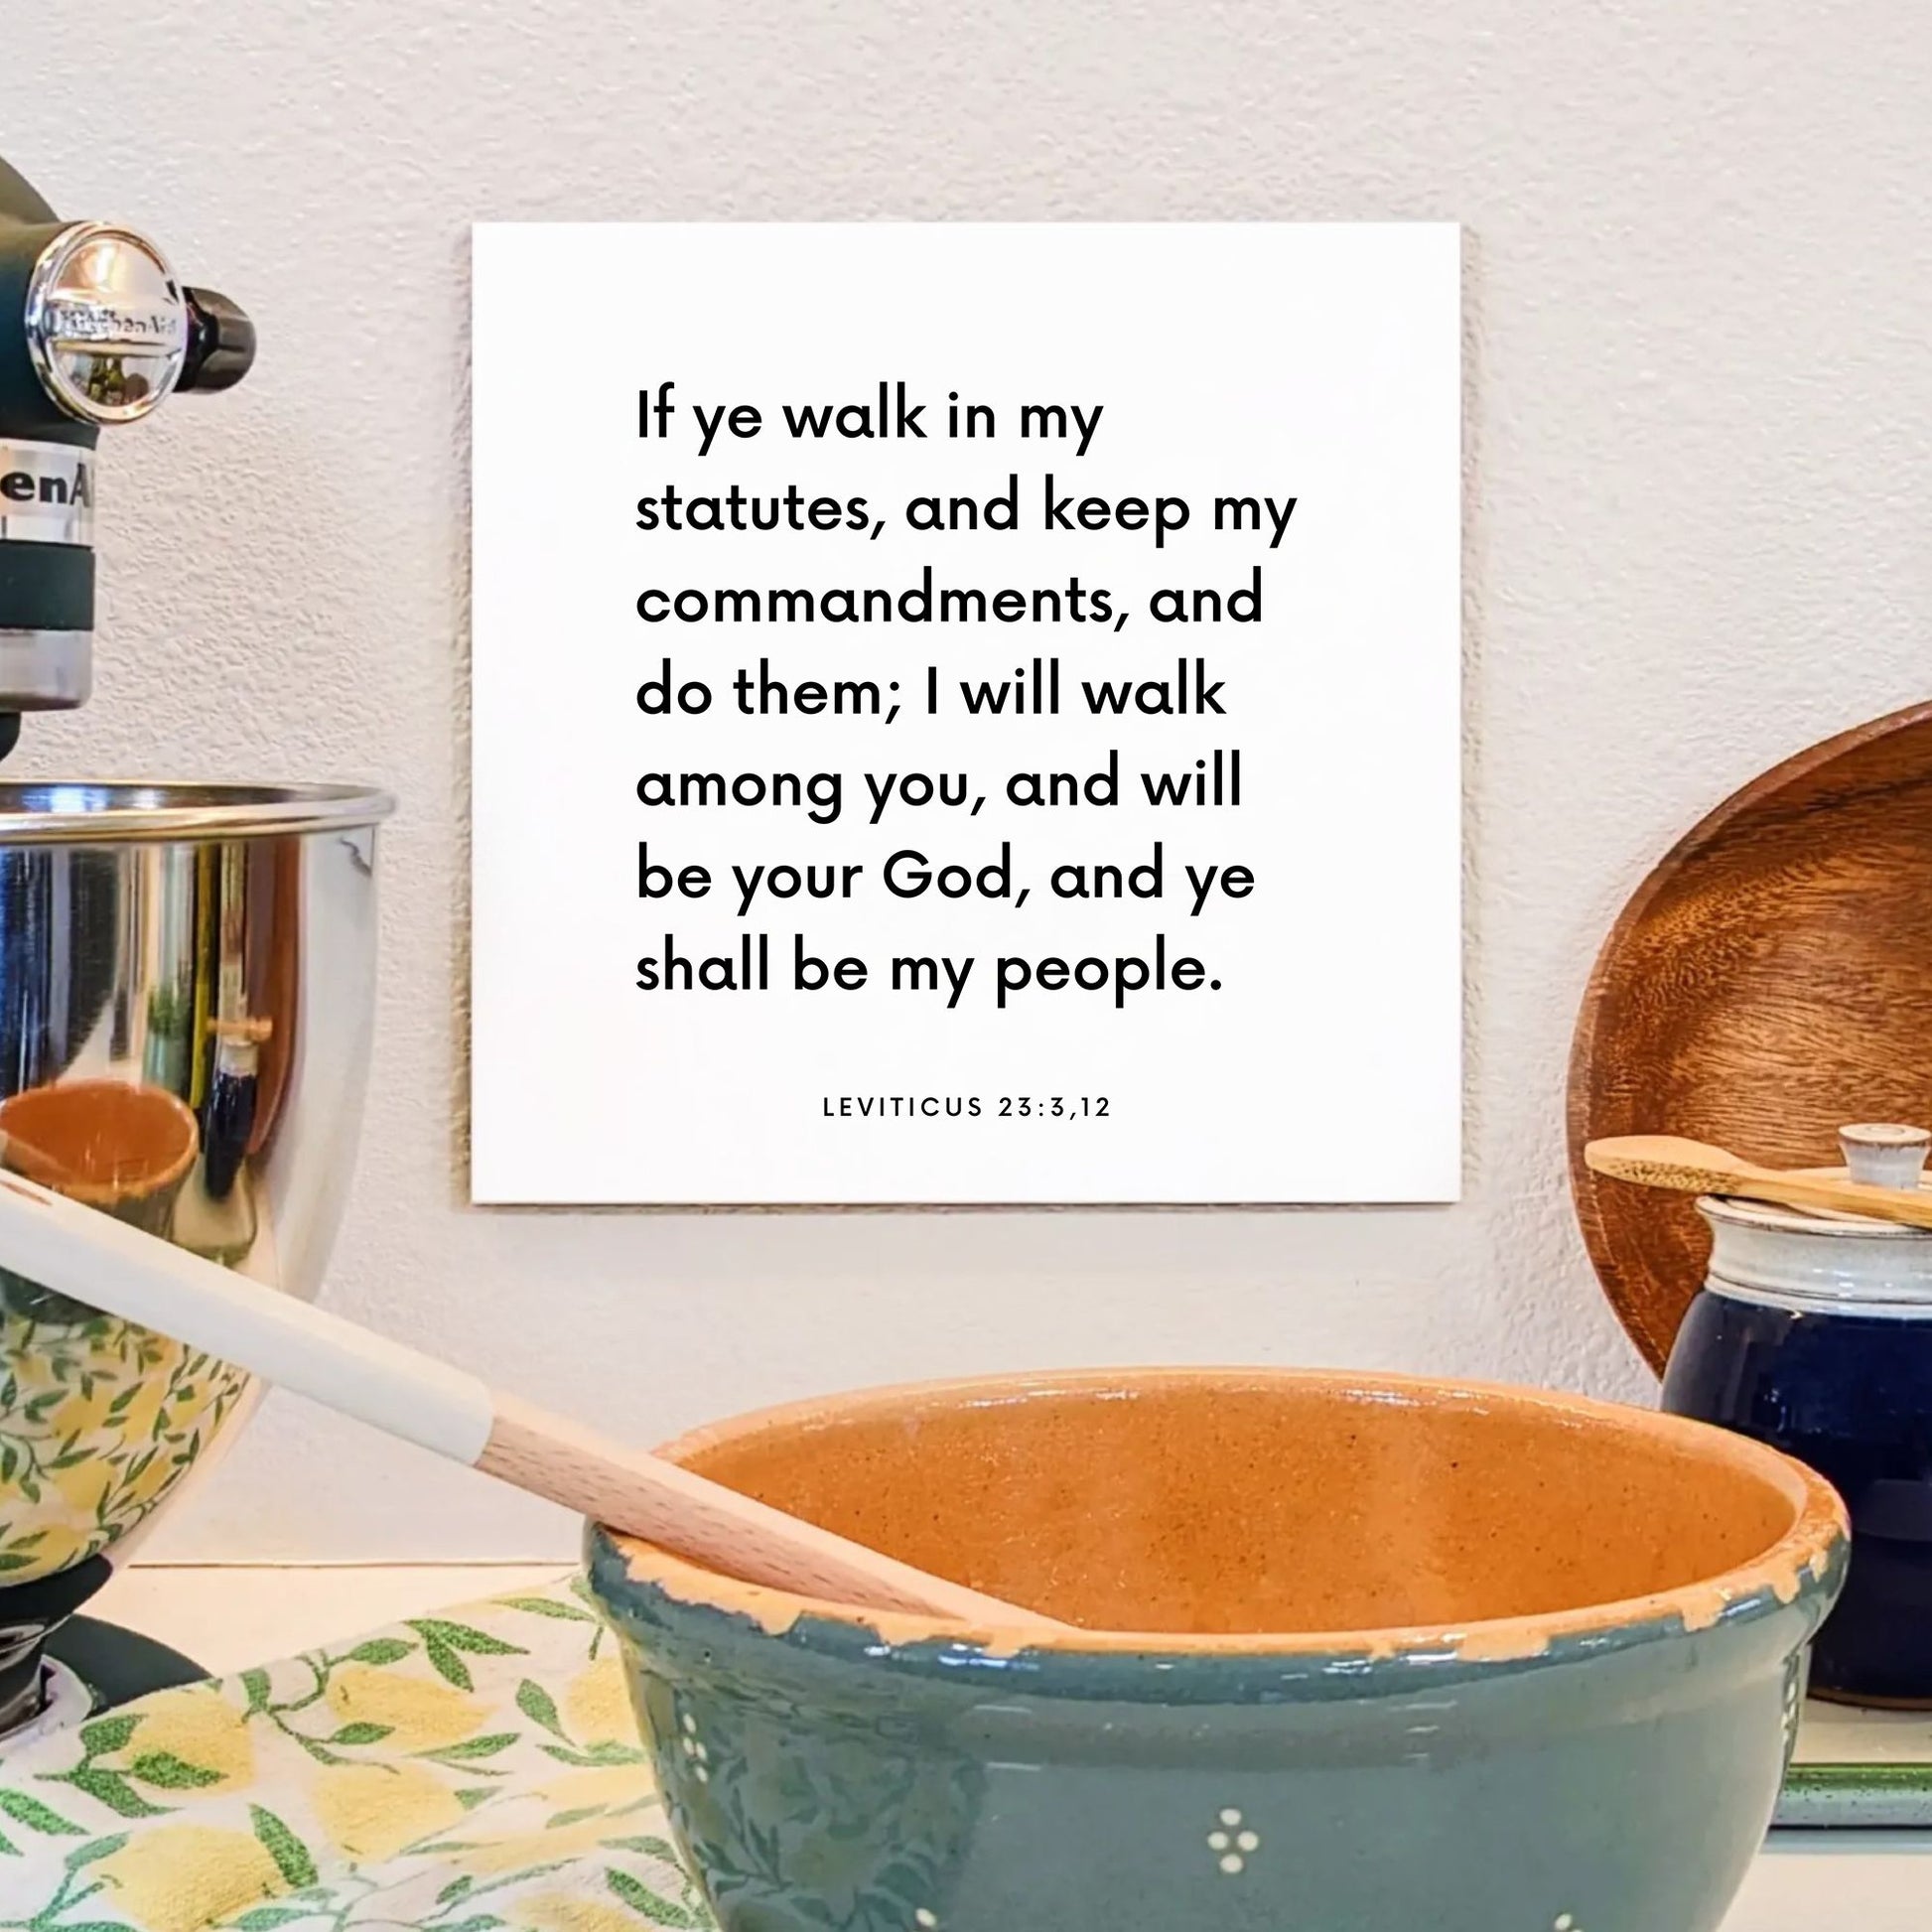 Kitchen mouting of the scripture tile for Leviticus 23:3,12 - "I will walk among you, and will be your God"